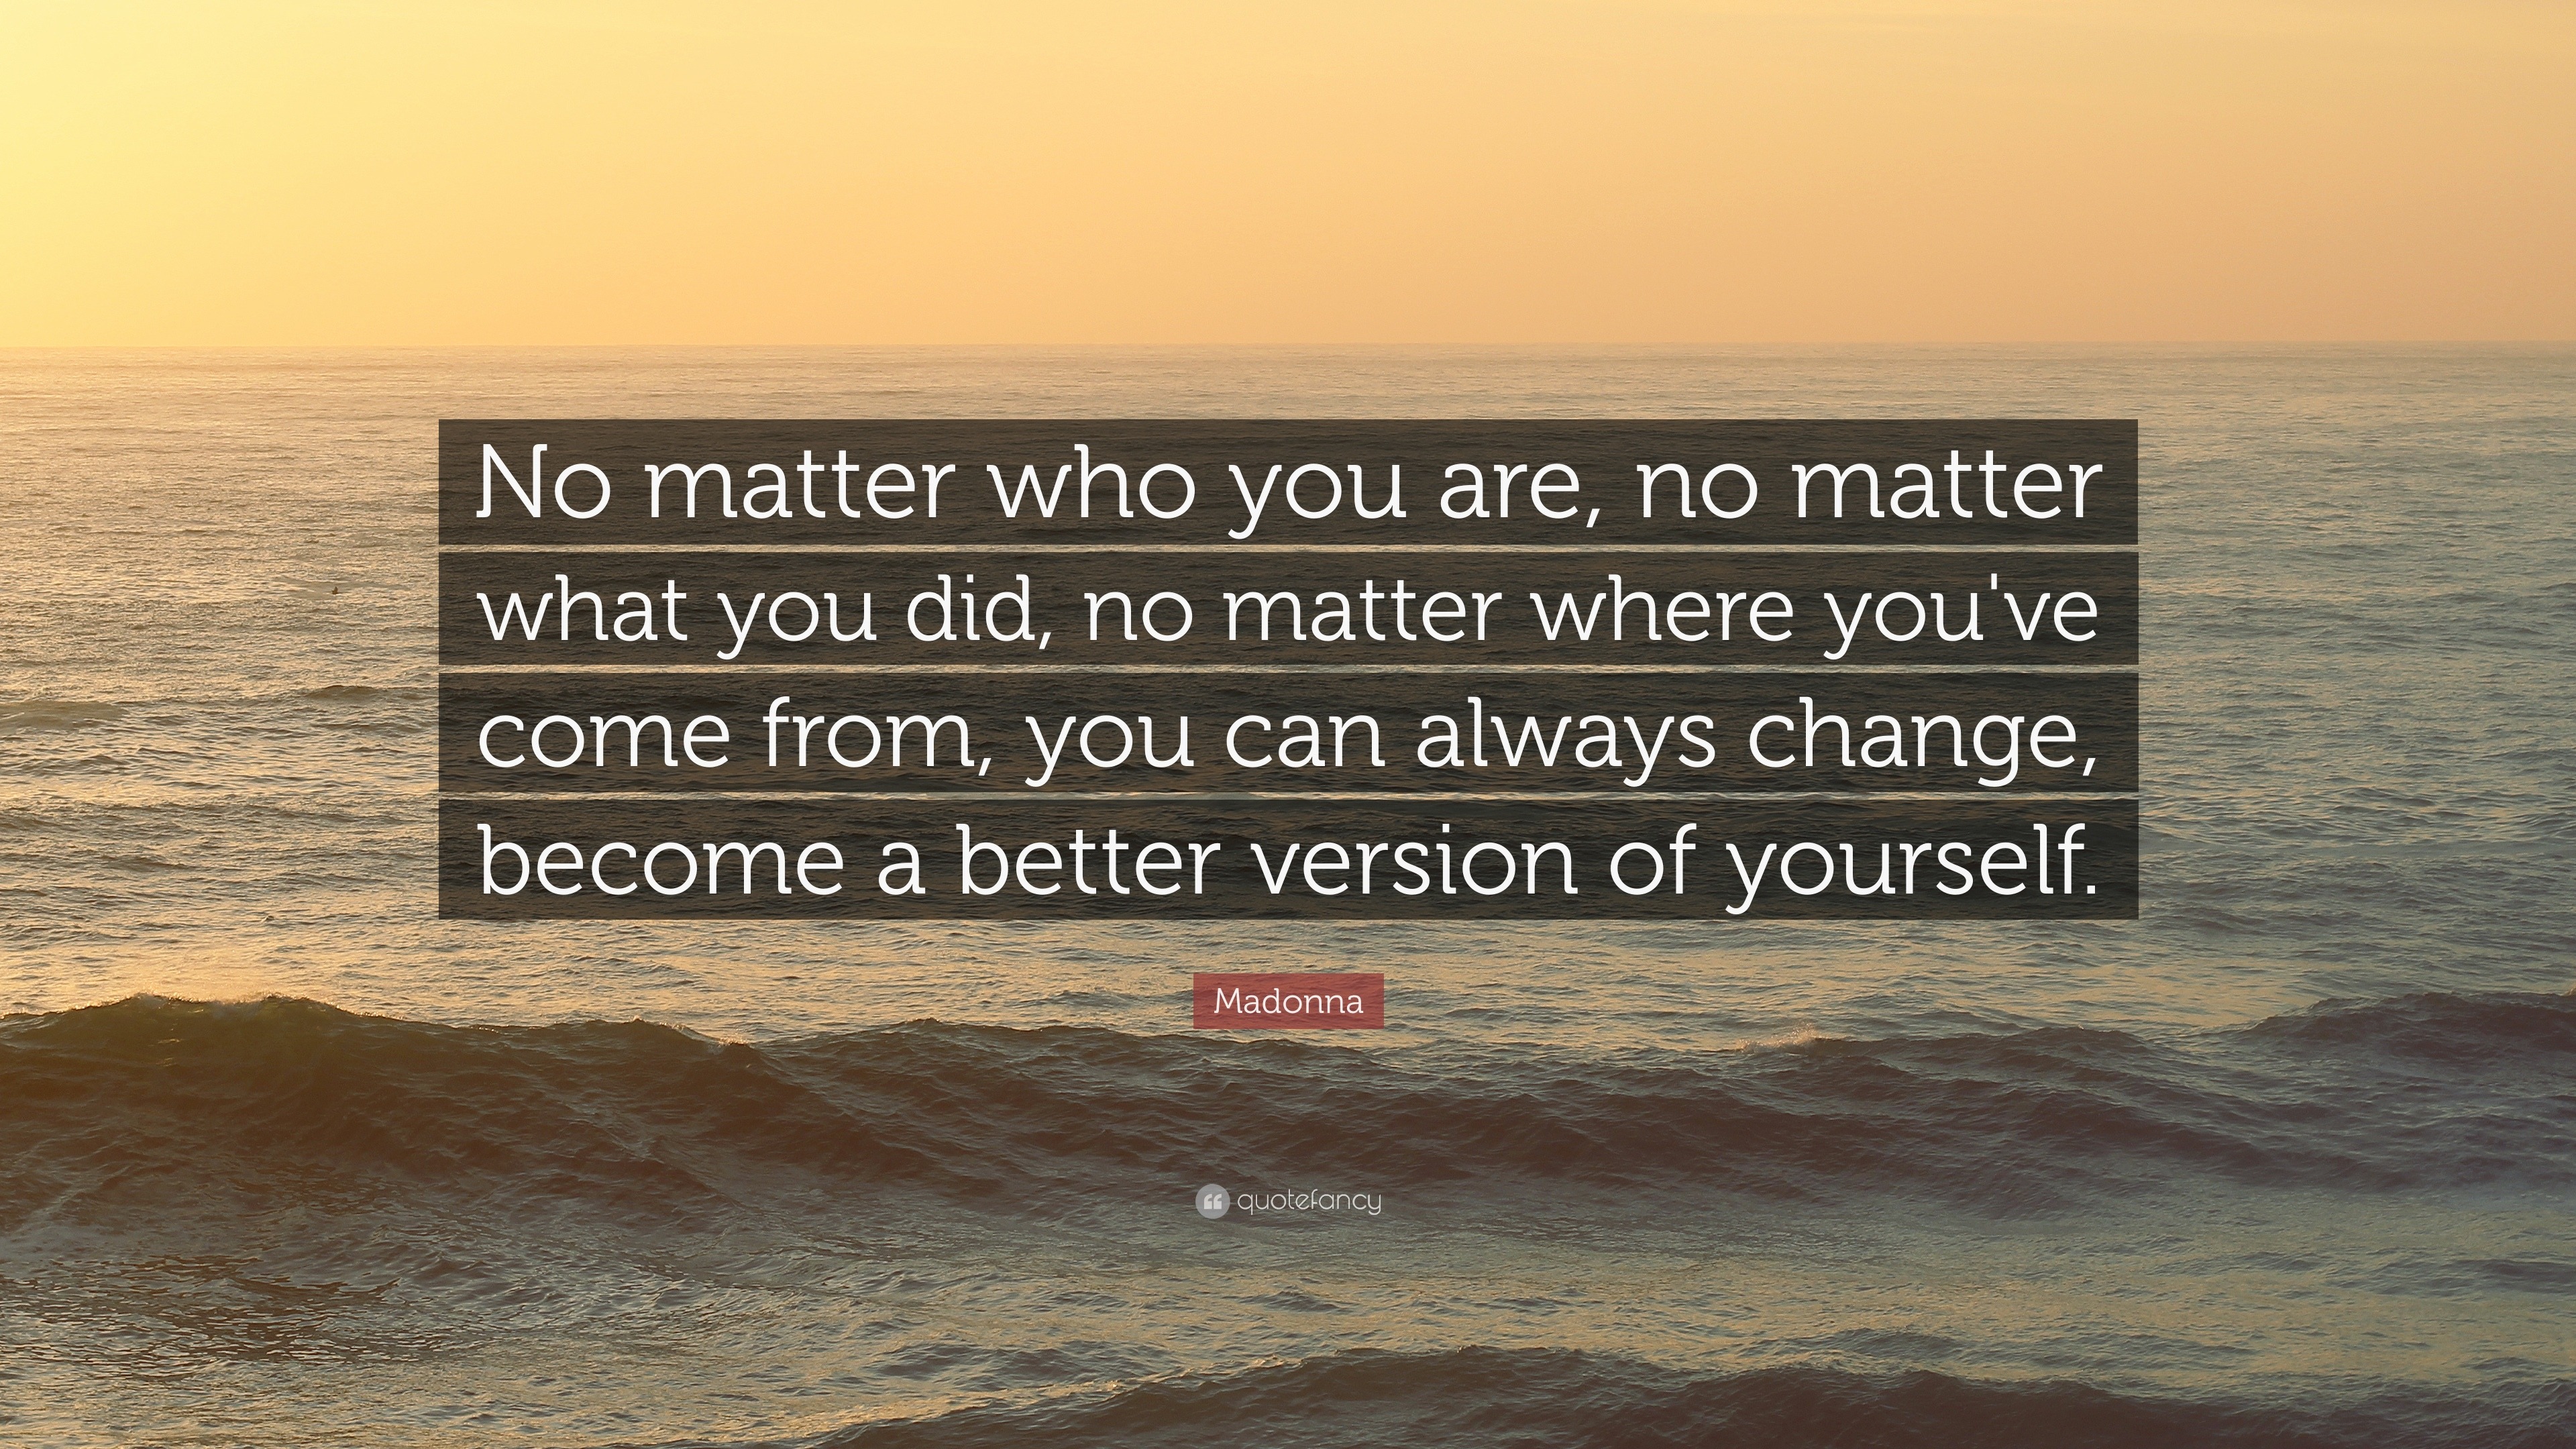 matter madonna quote did come always change better ve become quotes version yourself quotefancy inspirational motivational